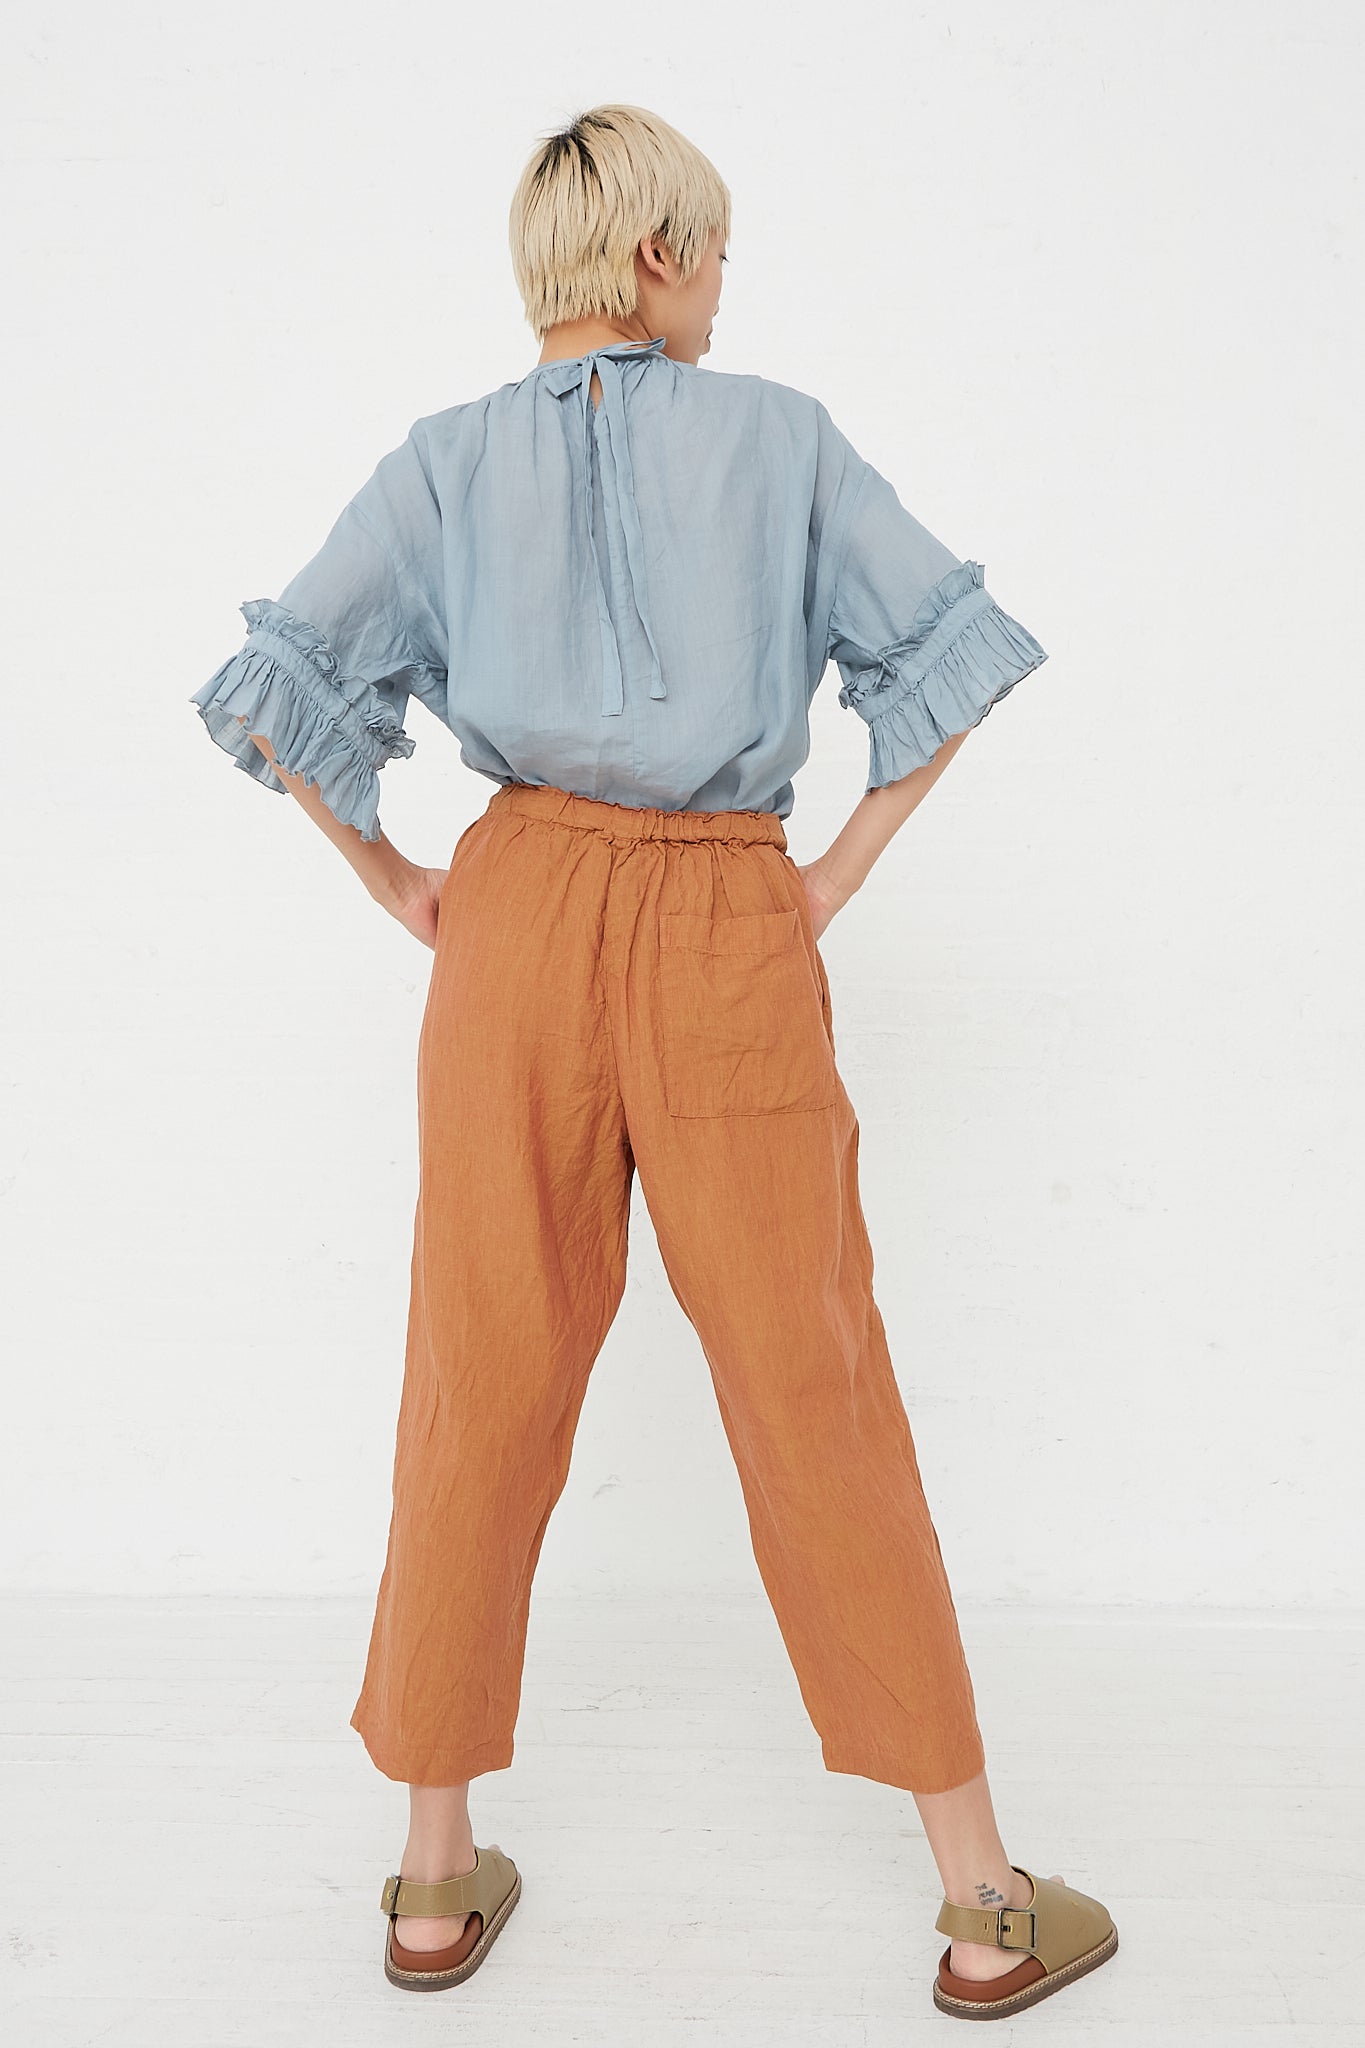 nest Robe - Hemp Yarn Dyed Easy Fit Pant in Brick back view